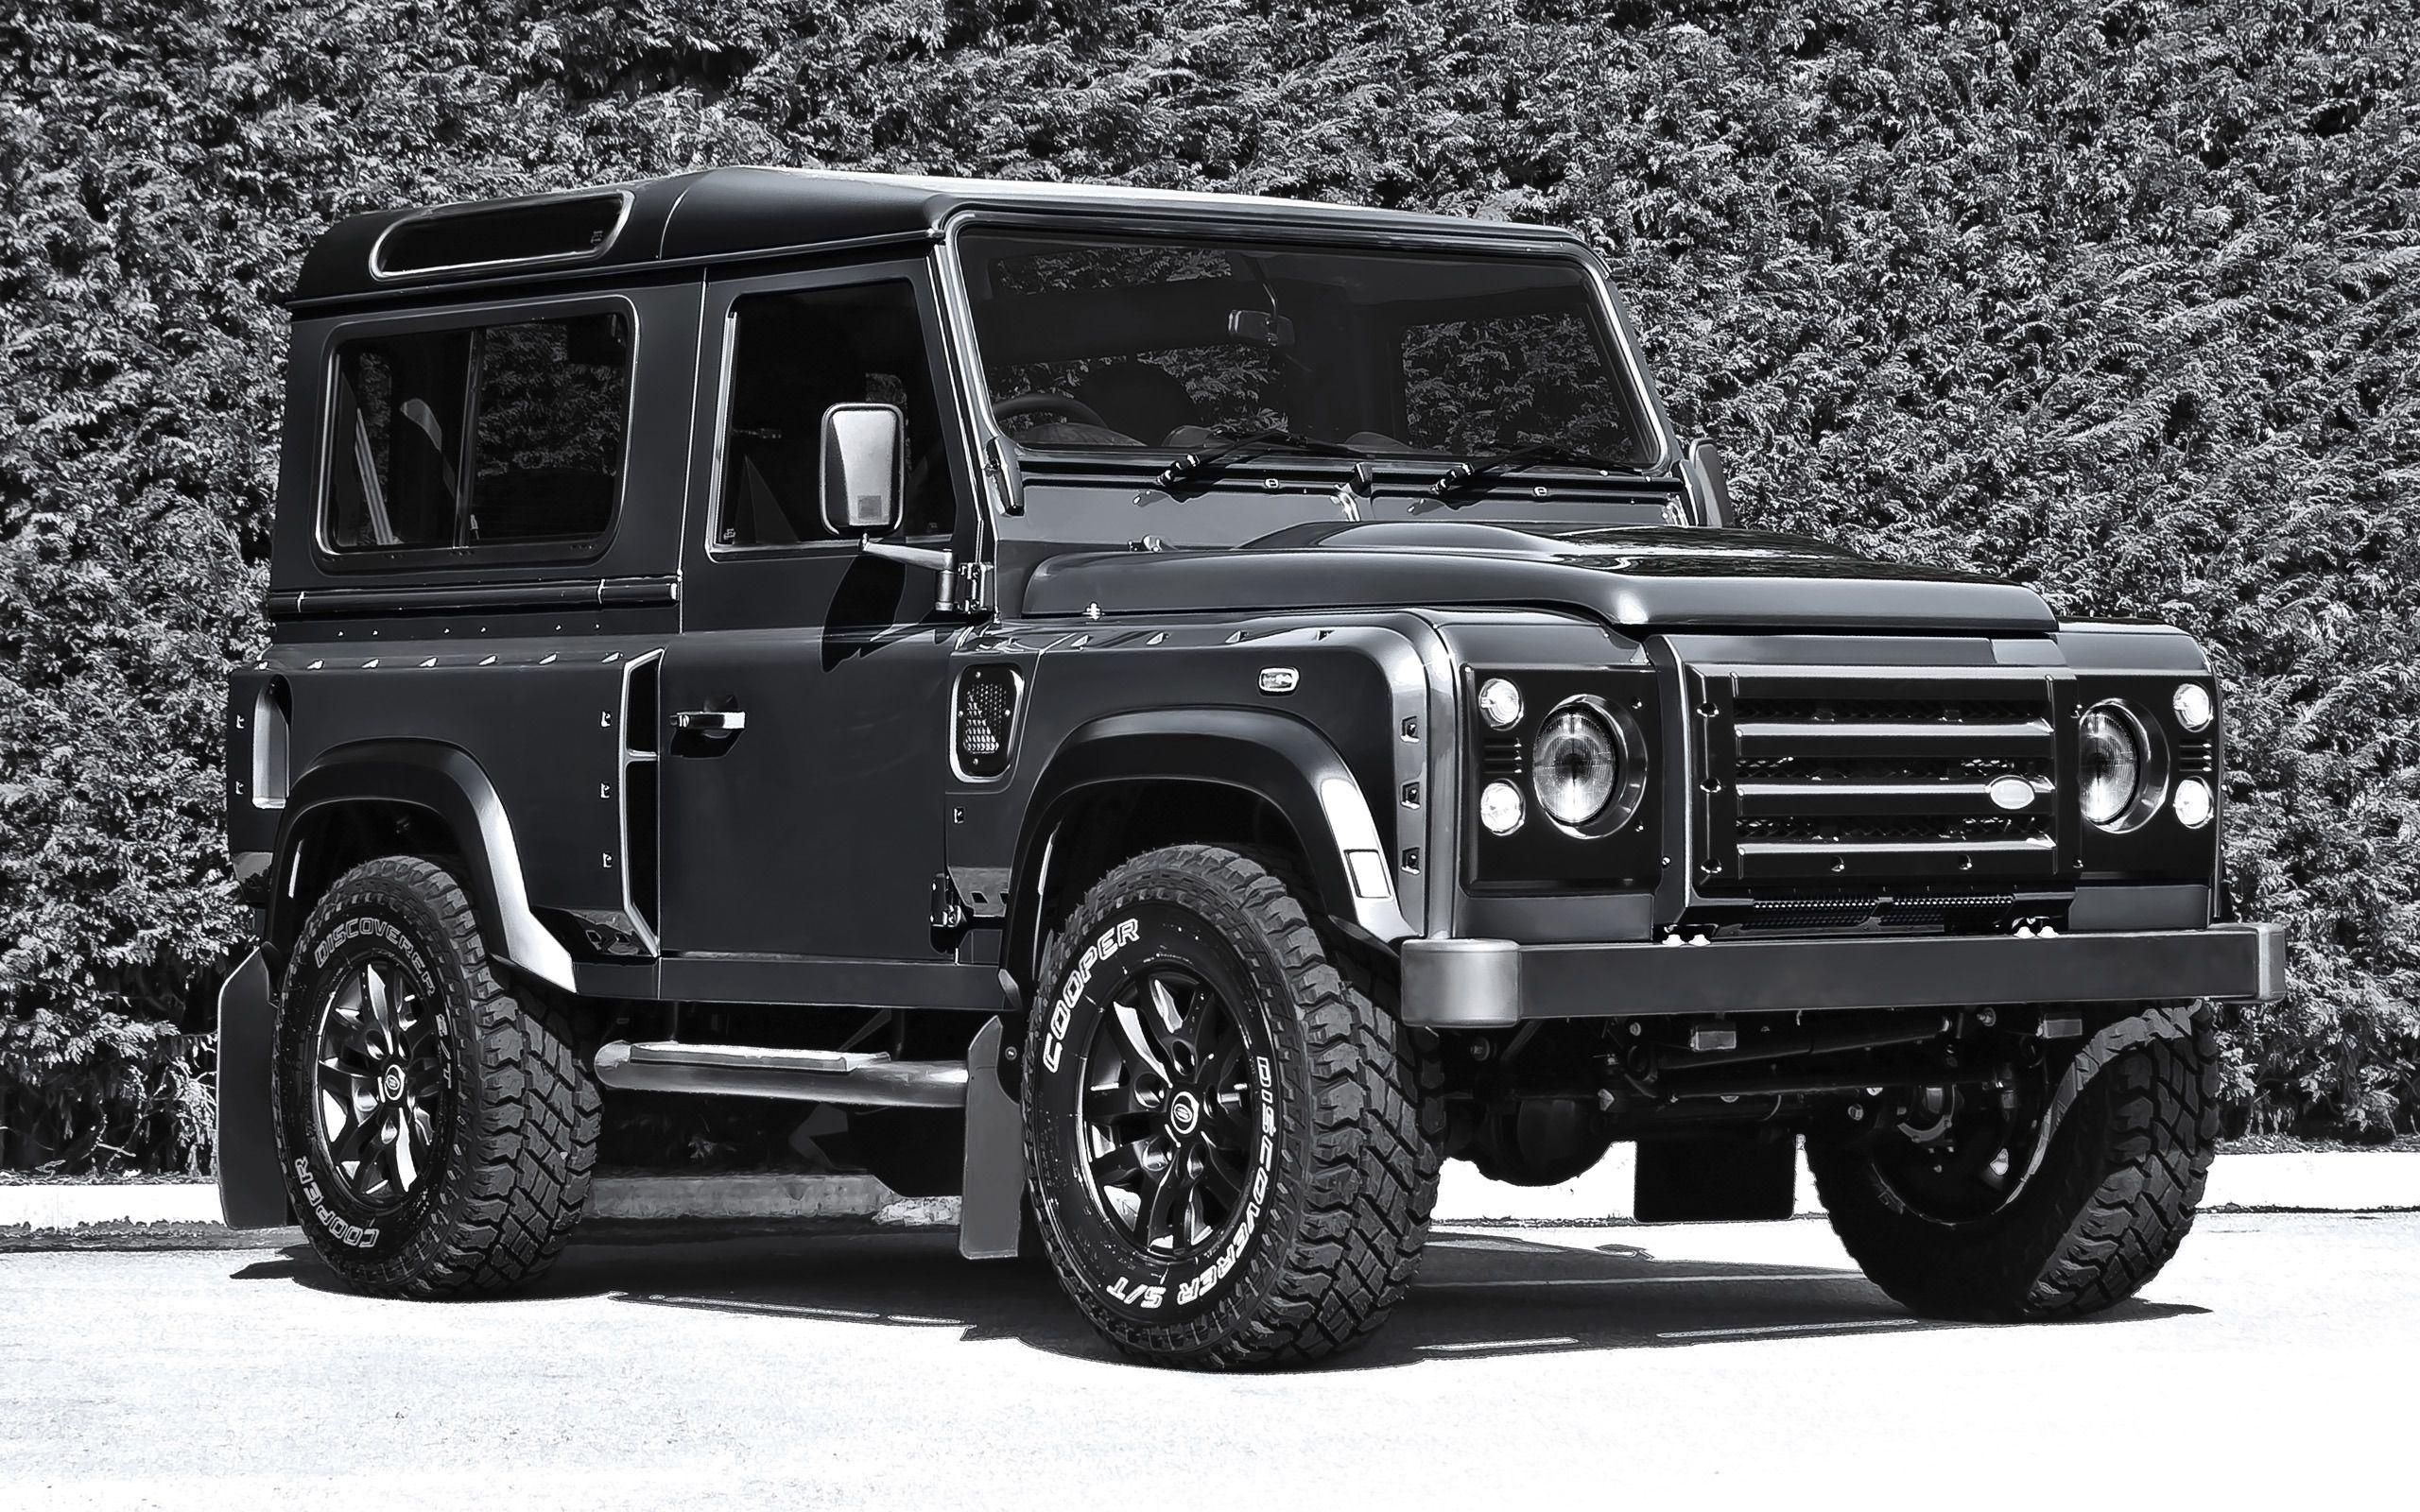 Land Rover Defender wallpapers, High-quality images, Adventure SUV, Off-road, 2560x1600 HD Desktop